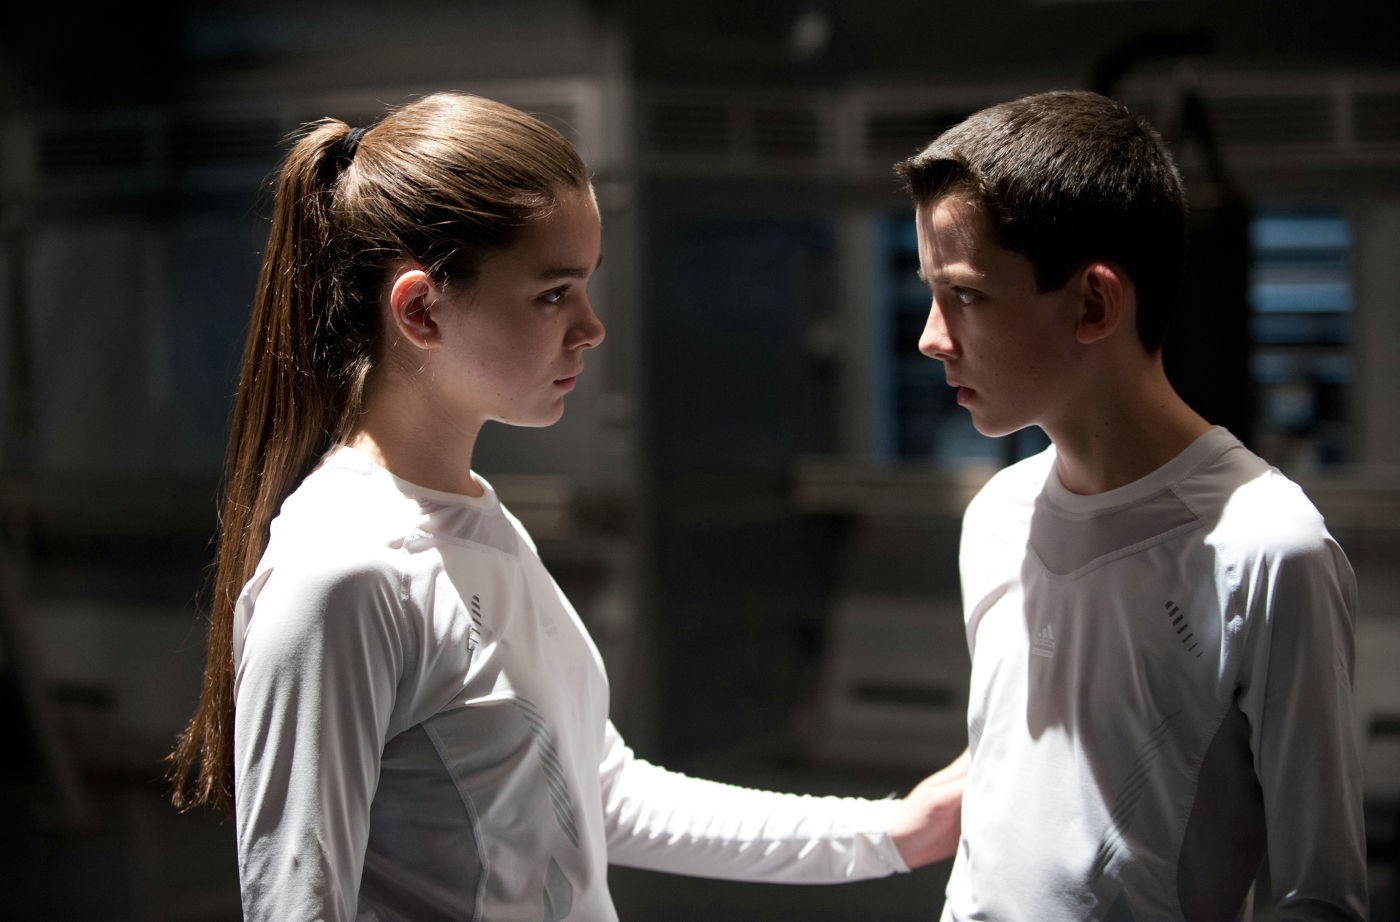 Hailee Steinfeld stars as Petra Arkanian and Asa Butterfield stars as Ender Wiggin in Summit Entertainment's Ender's Game (2013)